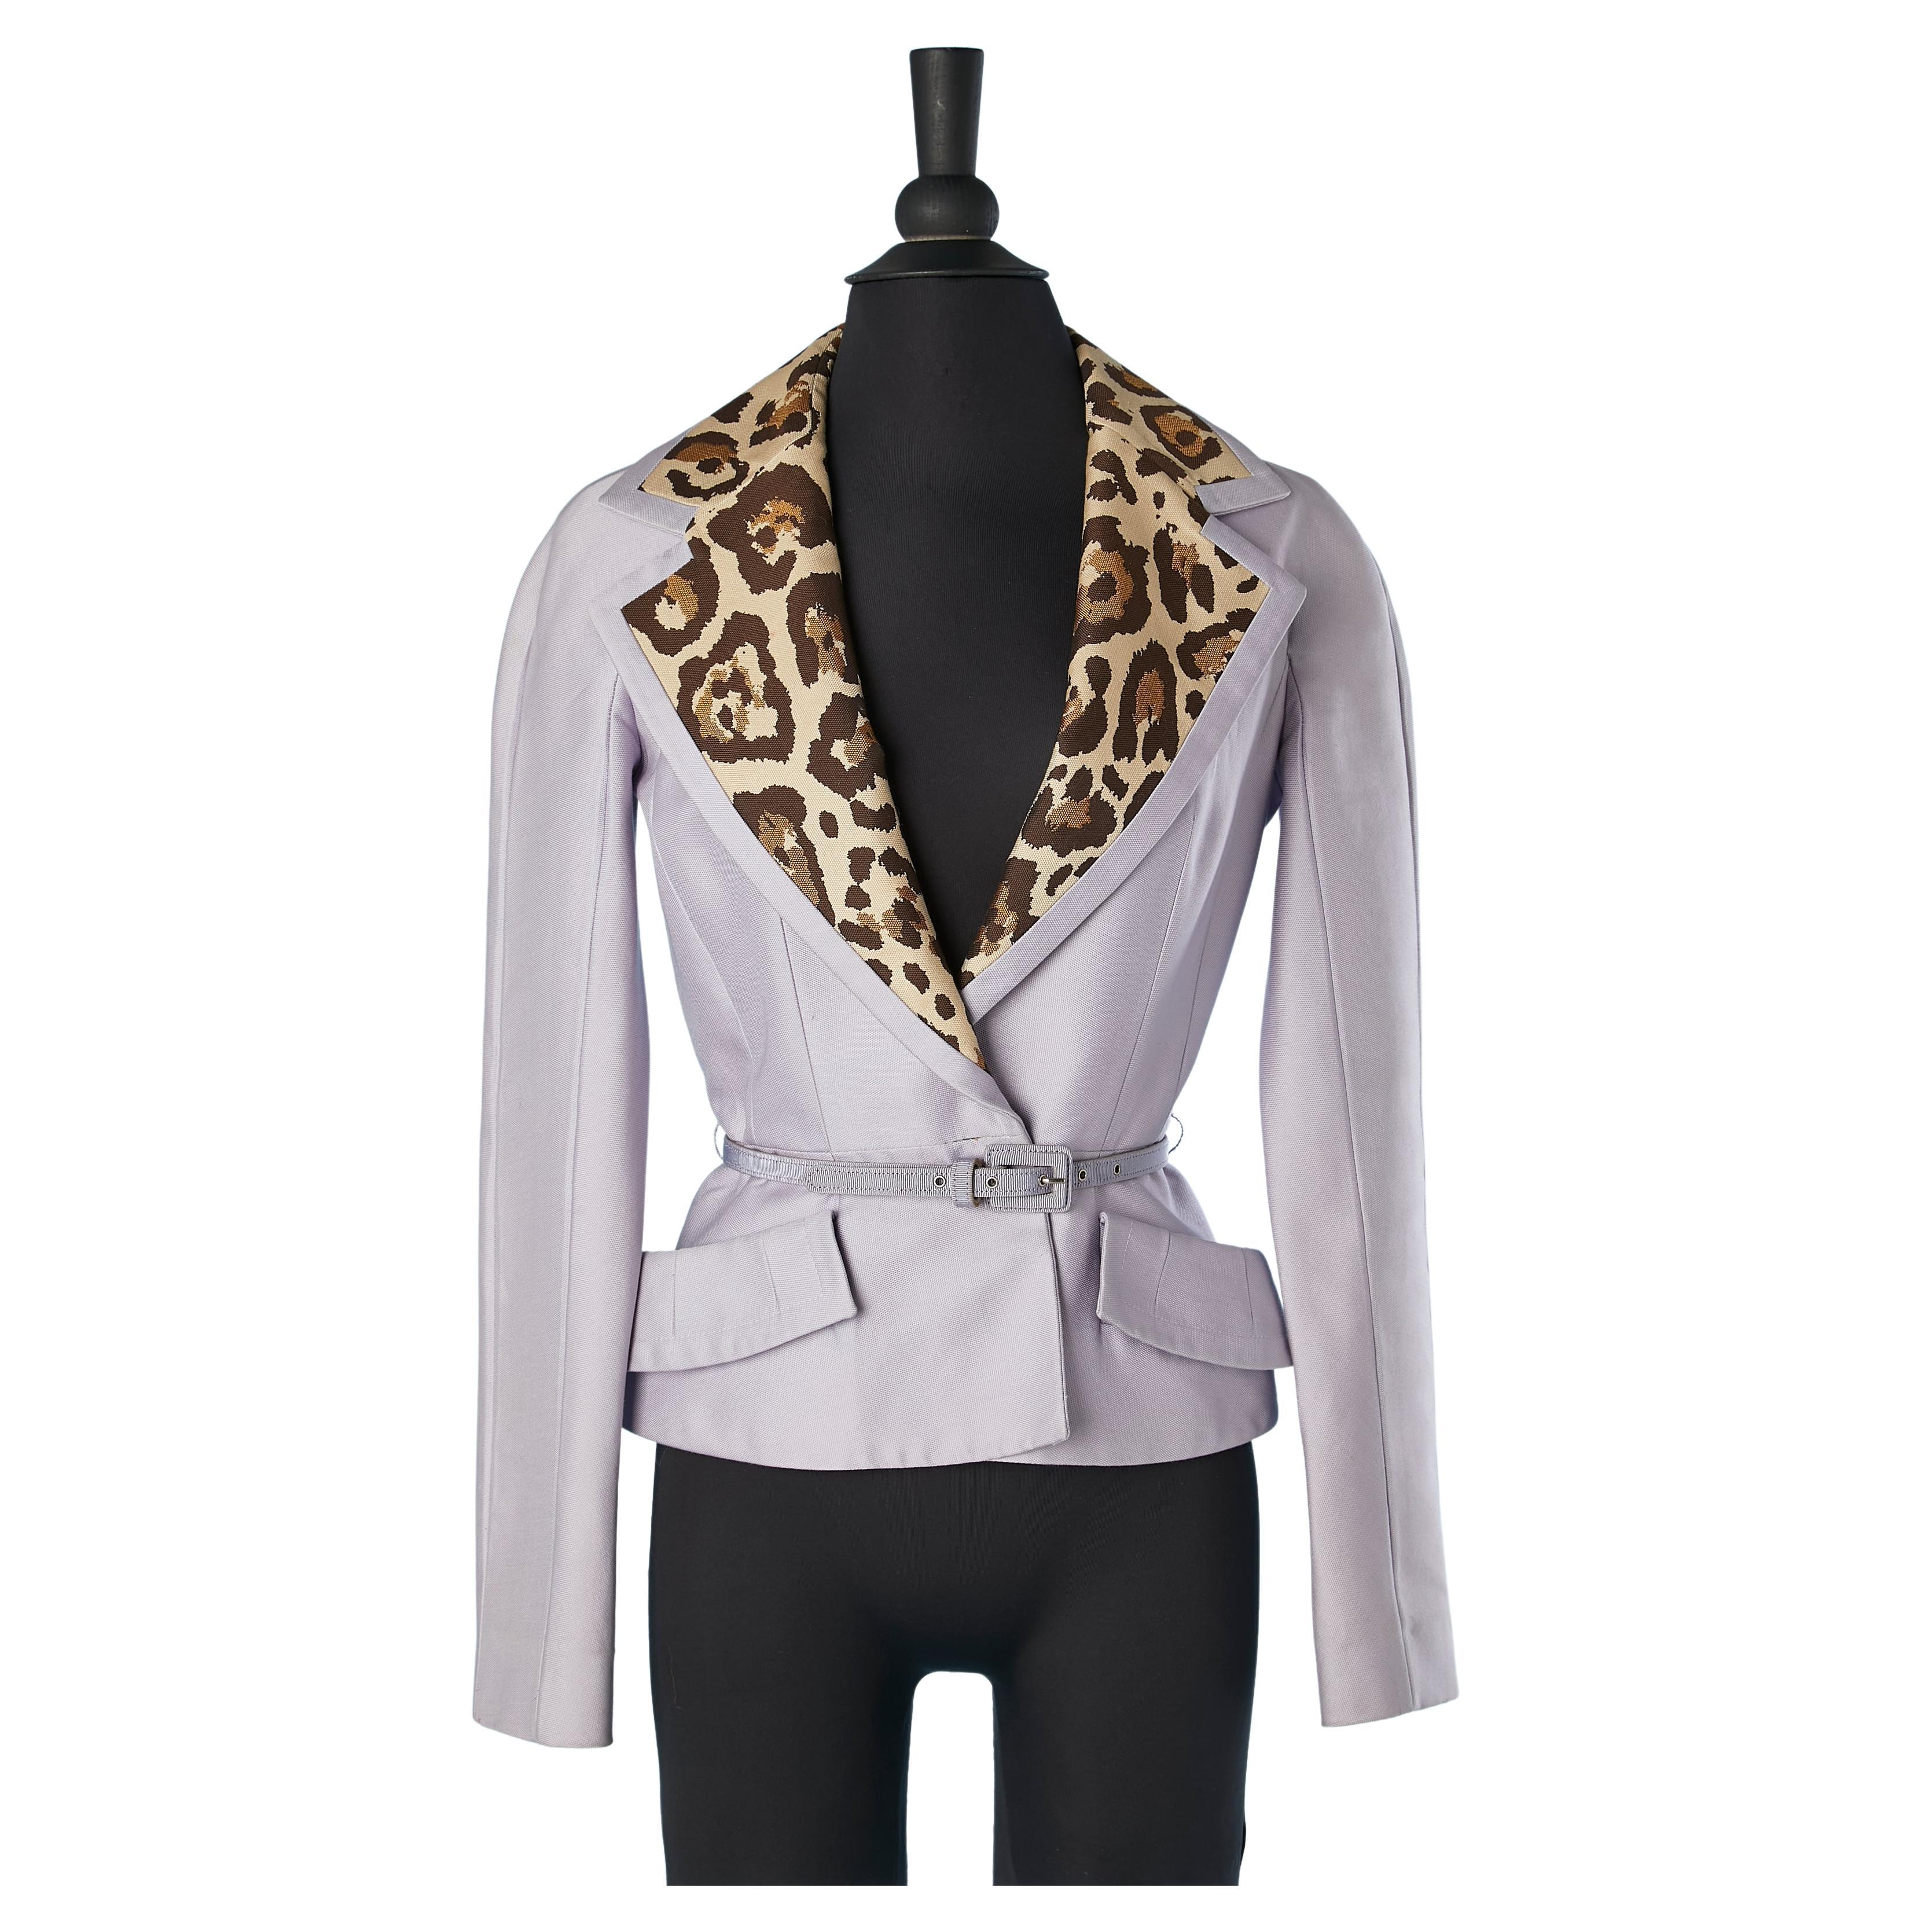 Lilak jacket with leopard jacquard collar Christian Dior by John Galliano Resort For Sale